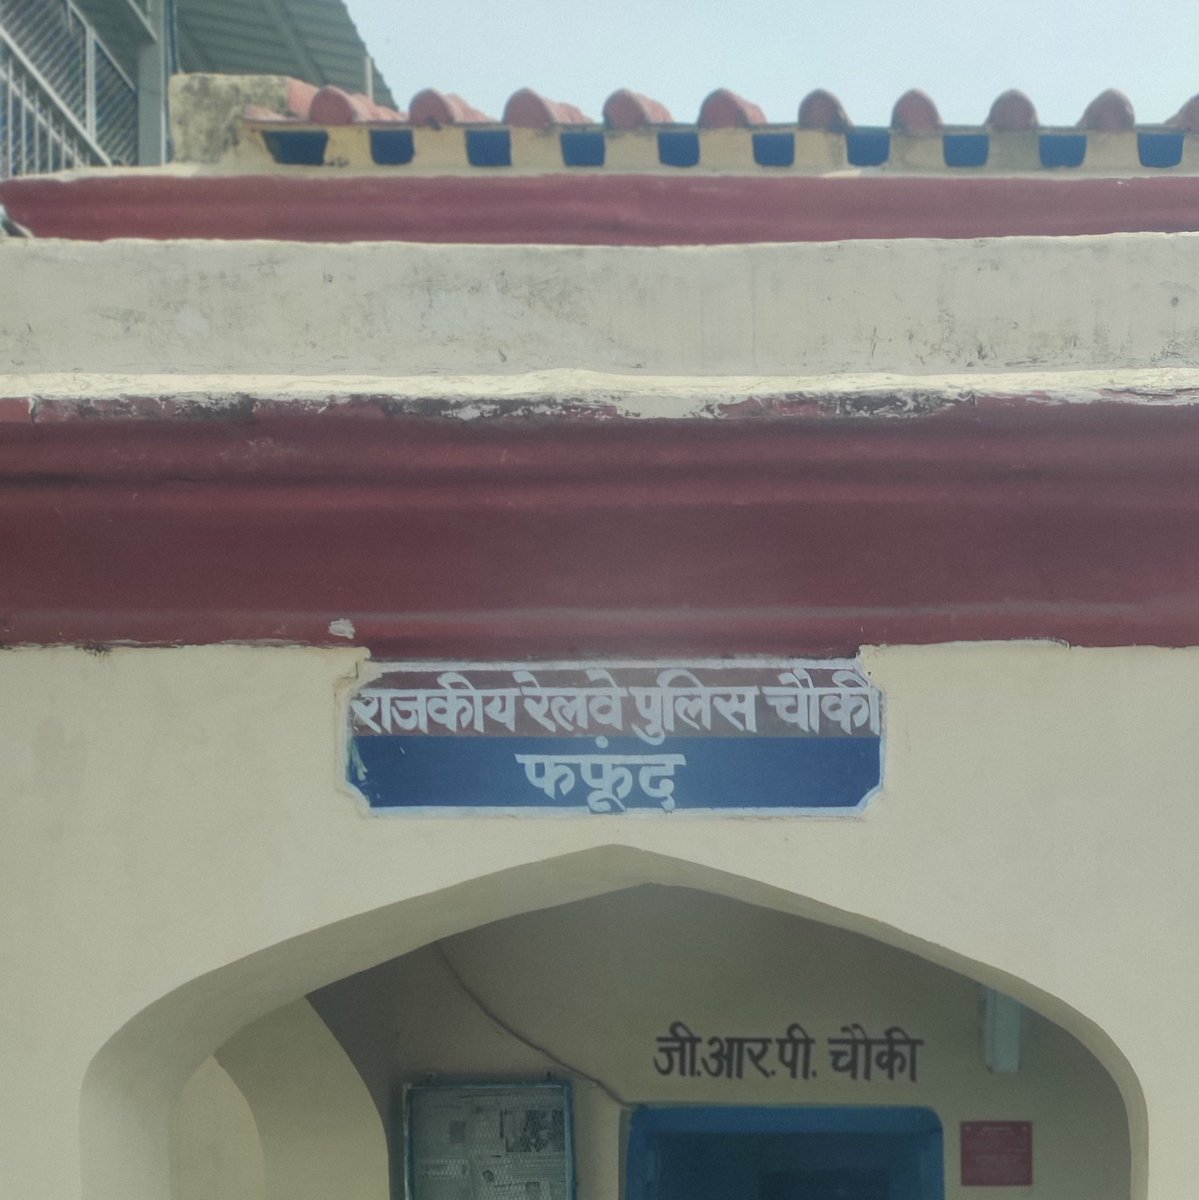 Never knew Phaphund was a place😳. #Phaphund was always the fungus found on stale bread/ stale sweets or rotting food. For the uninitiated like me this is a station between #Itawa & #Lucknow 
#incredibleIndia #cityNames #railwayStation #fungus #funnyNames #trainjourney